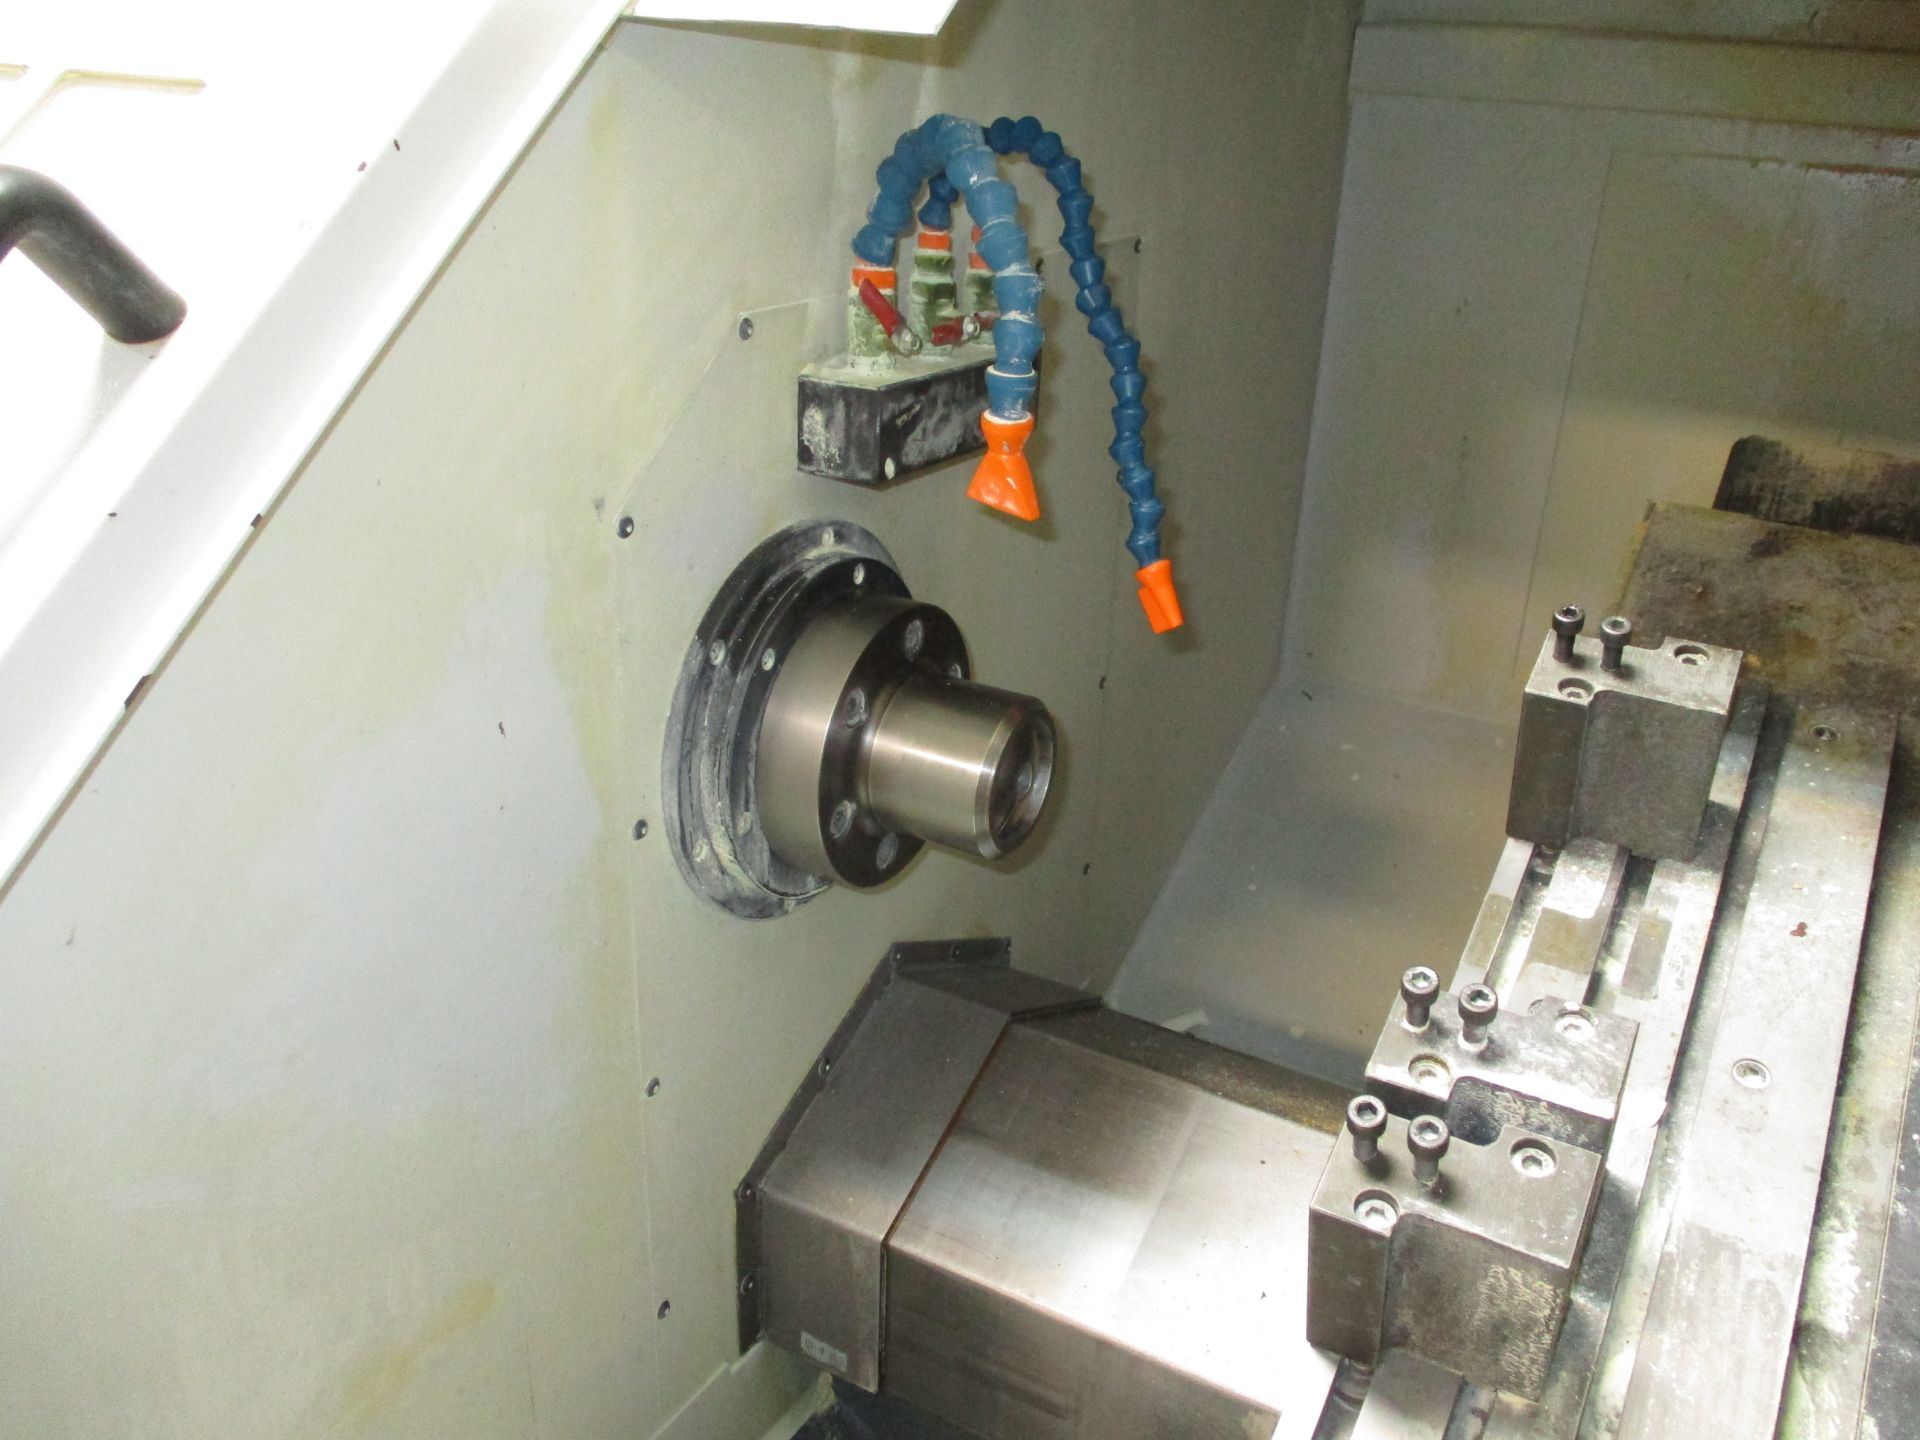 Cubic Model PLG-42L Gang Tooling CNC Lathe, SN 4202428, with Fanuc Series 0i Mate-TD CNC Control, - Image 7 of 13